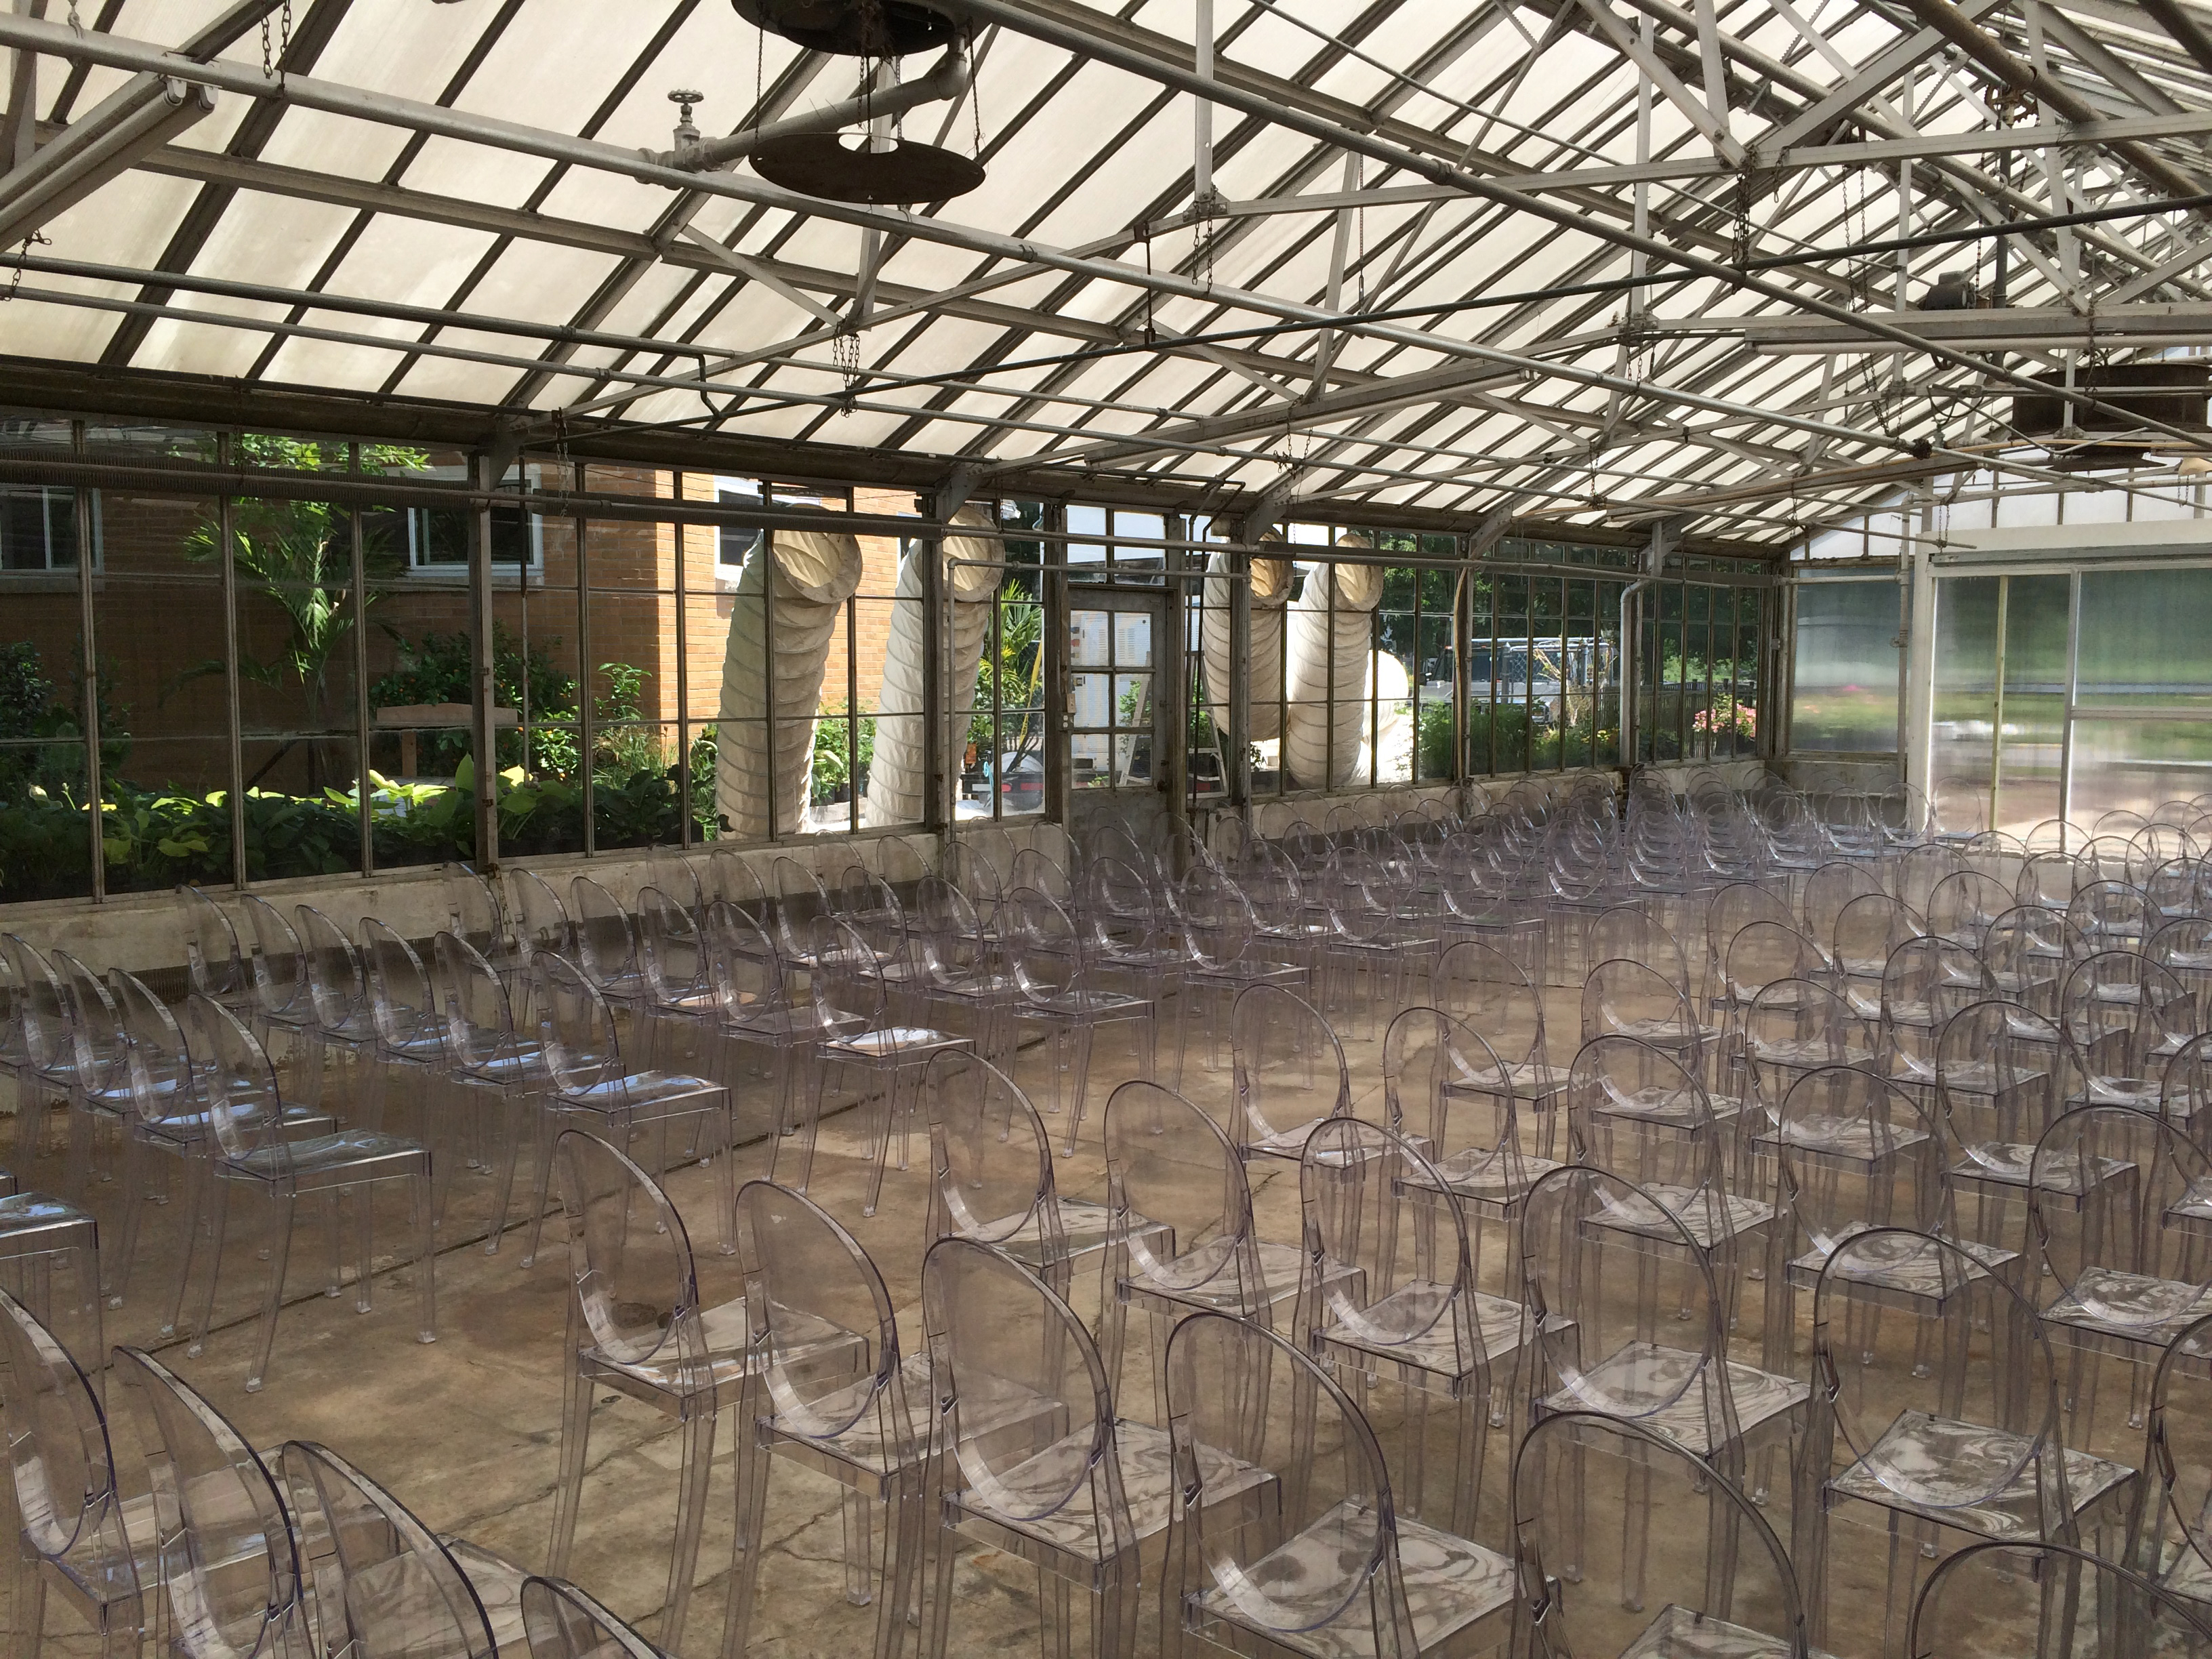 Inside the greenhouse with chairs for wedding. See Air Conditioning ducts in windows